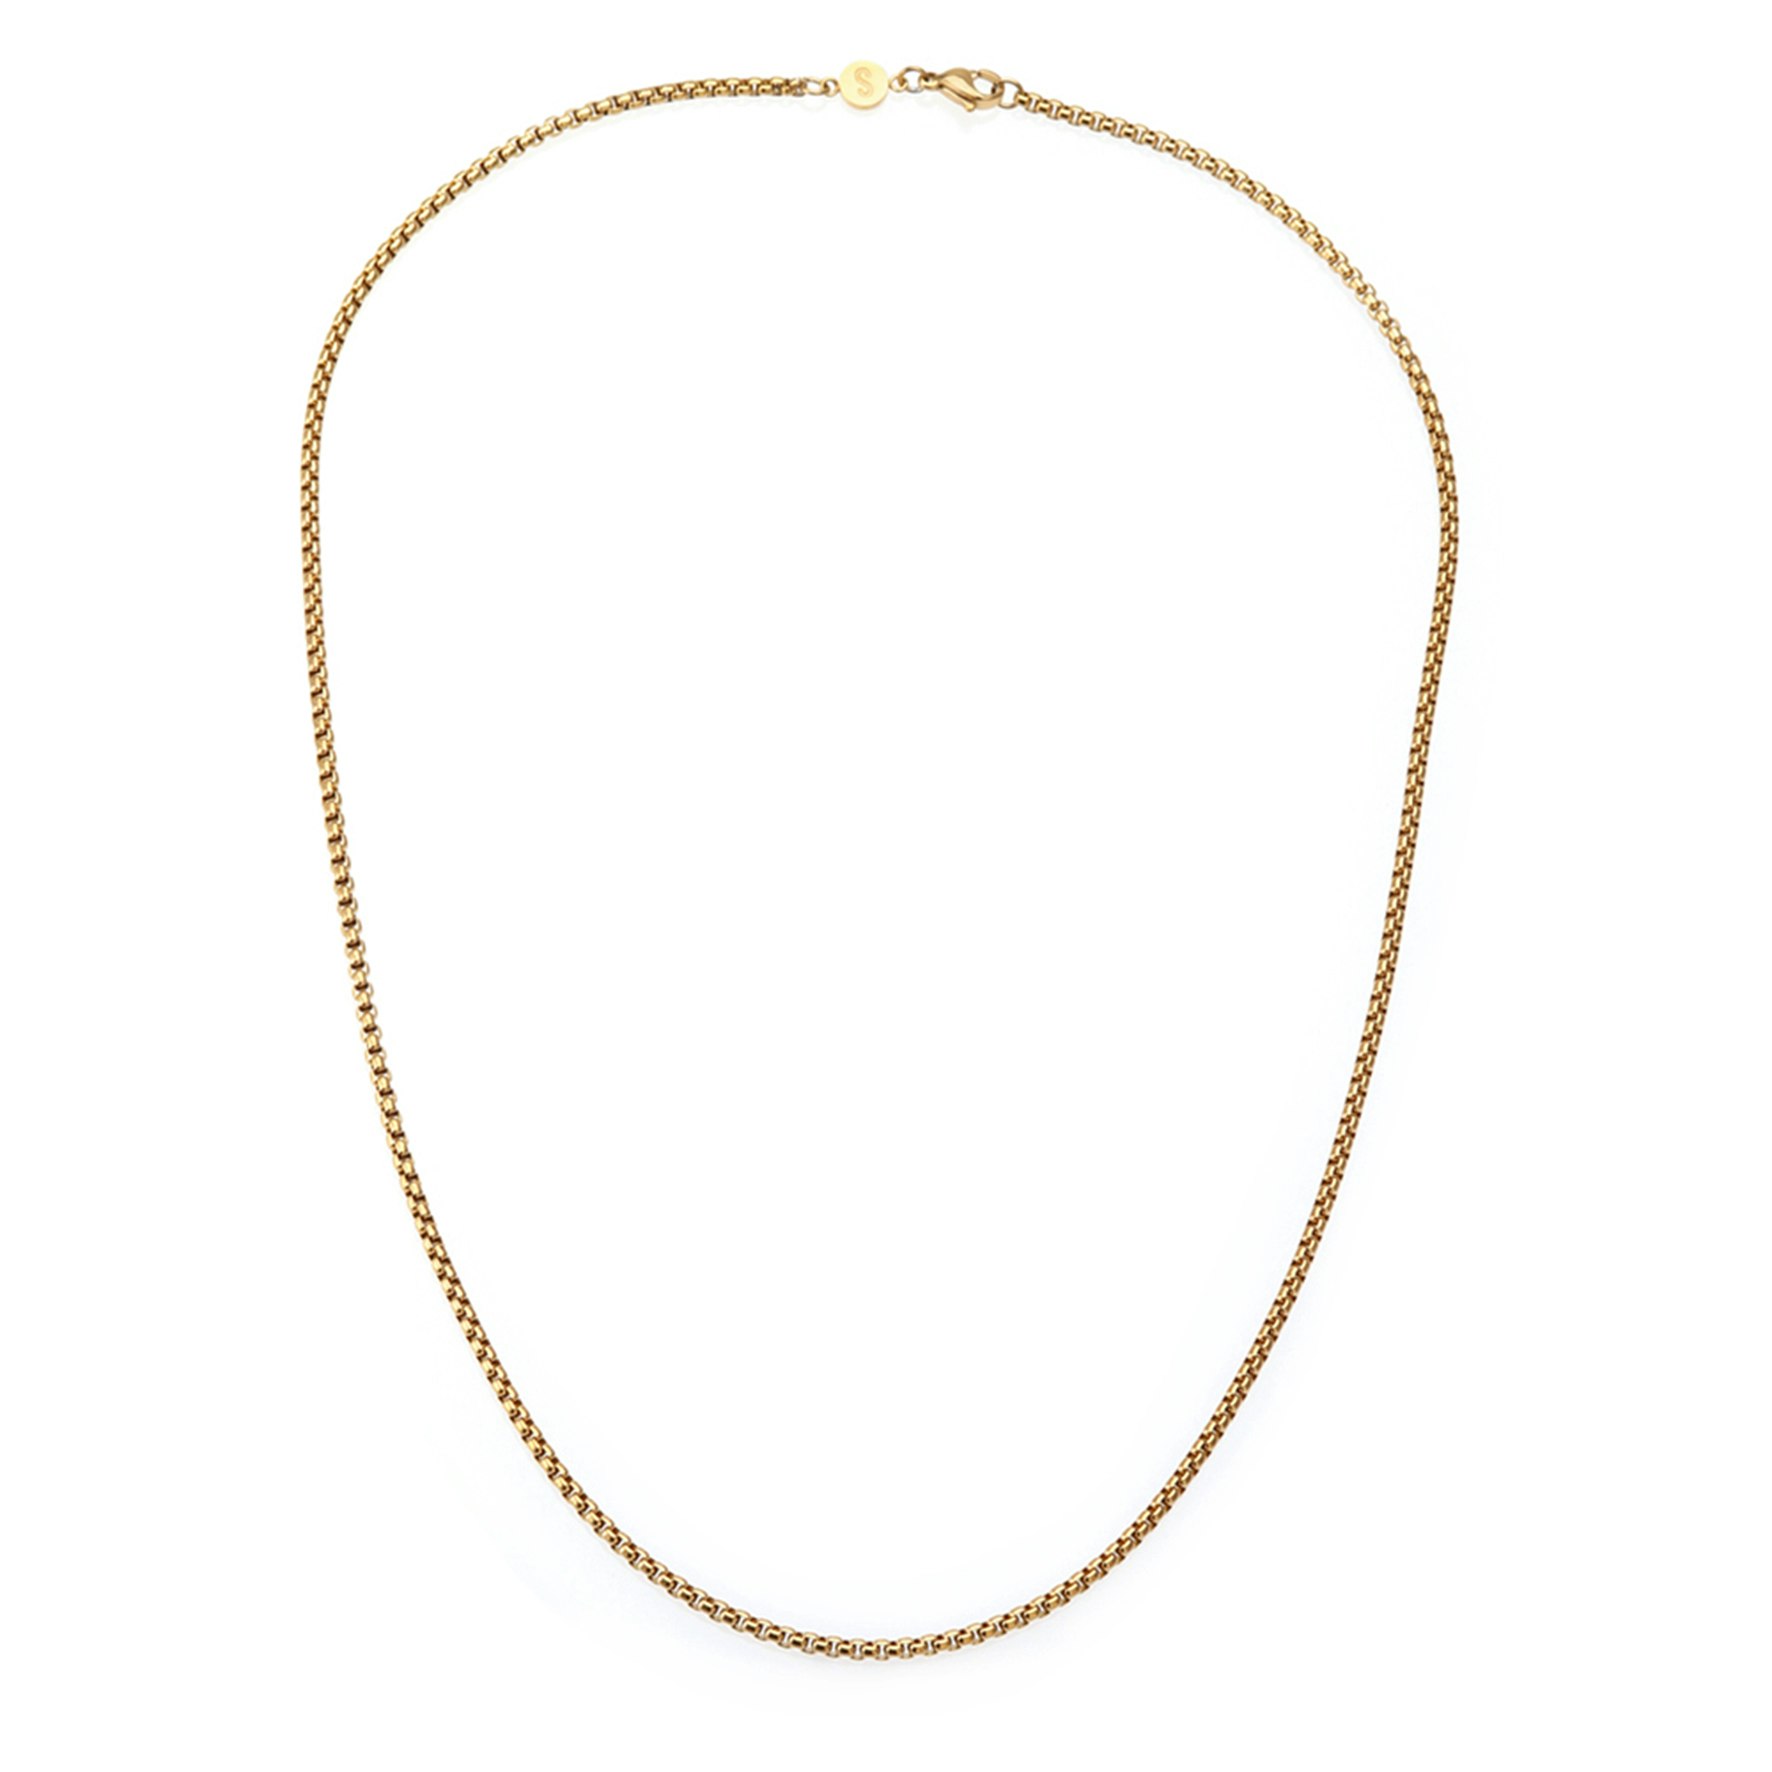 Panzer Necklace from SAMIE in Goldplated stainless steel